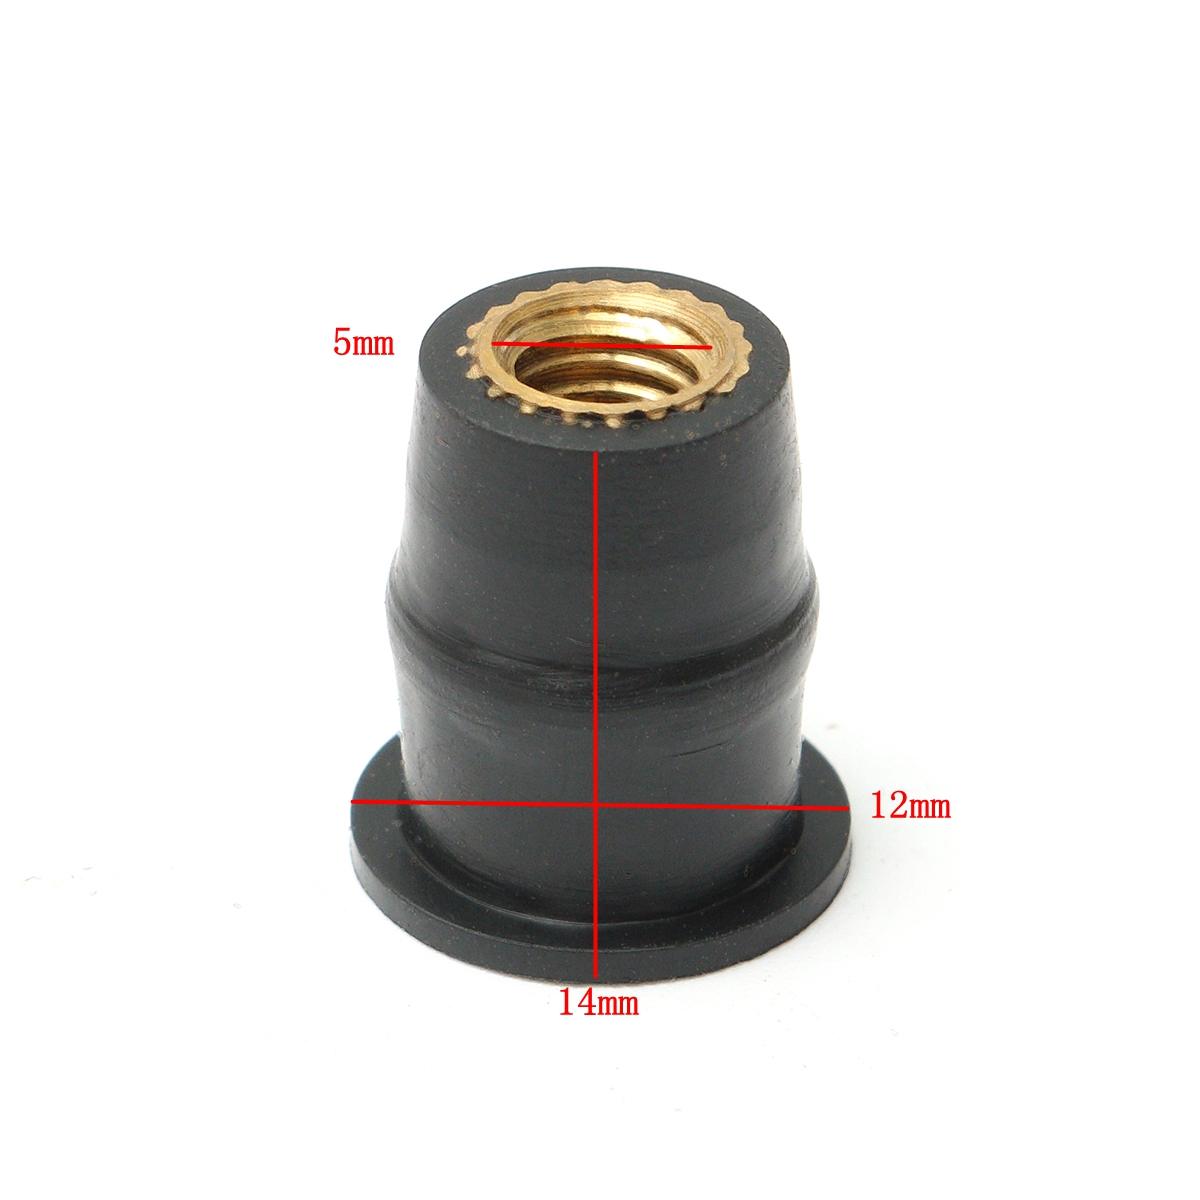 10pcs M5 5mm Metric Rubber Well Nuts Windscreedn Motorcycle Wind Shield Fairing Cowl